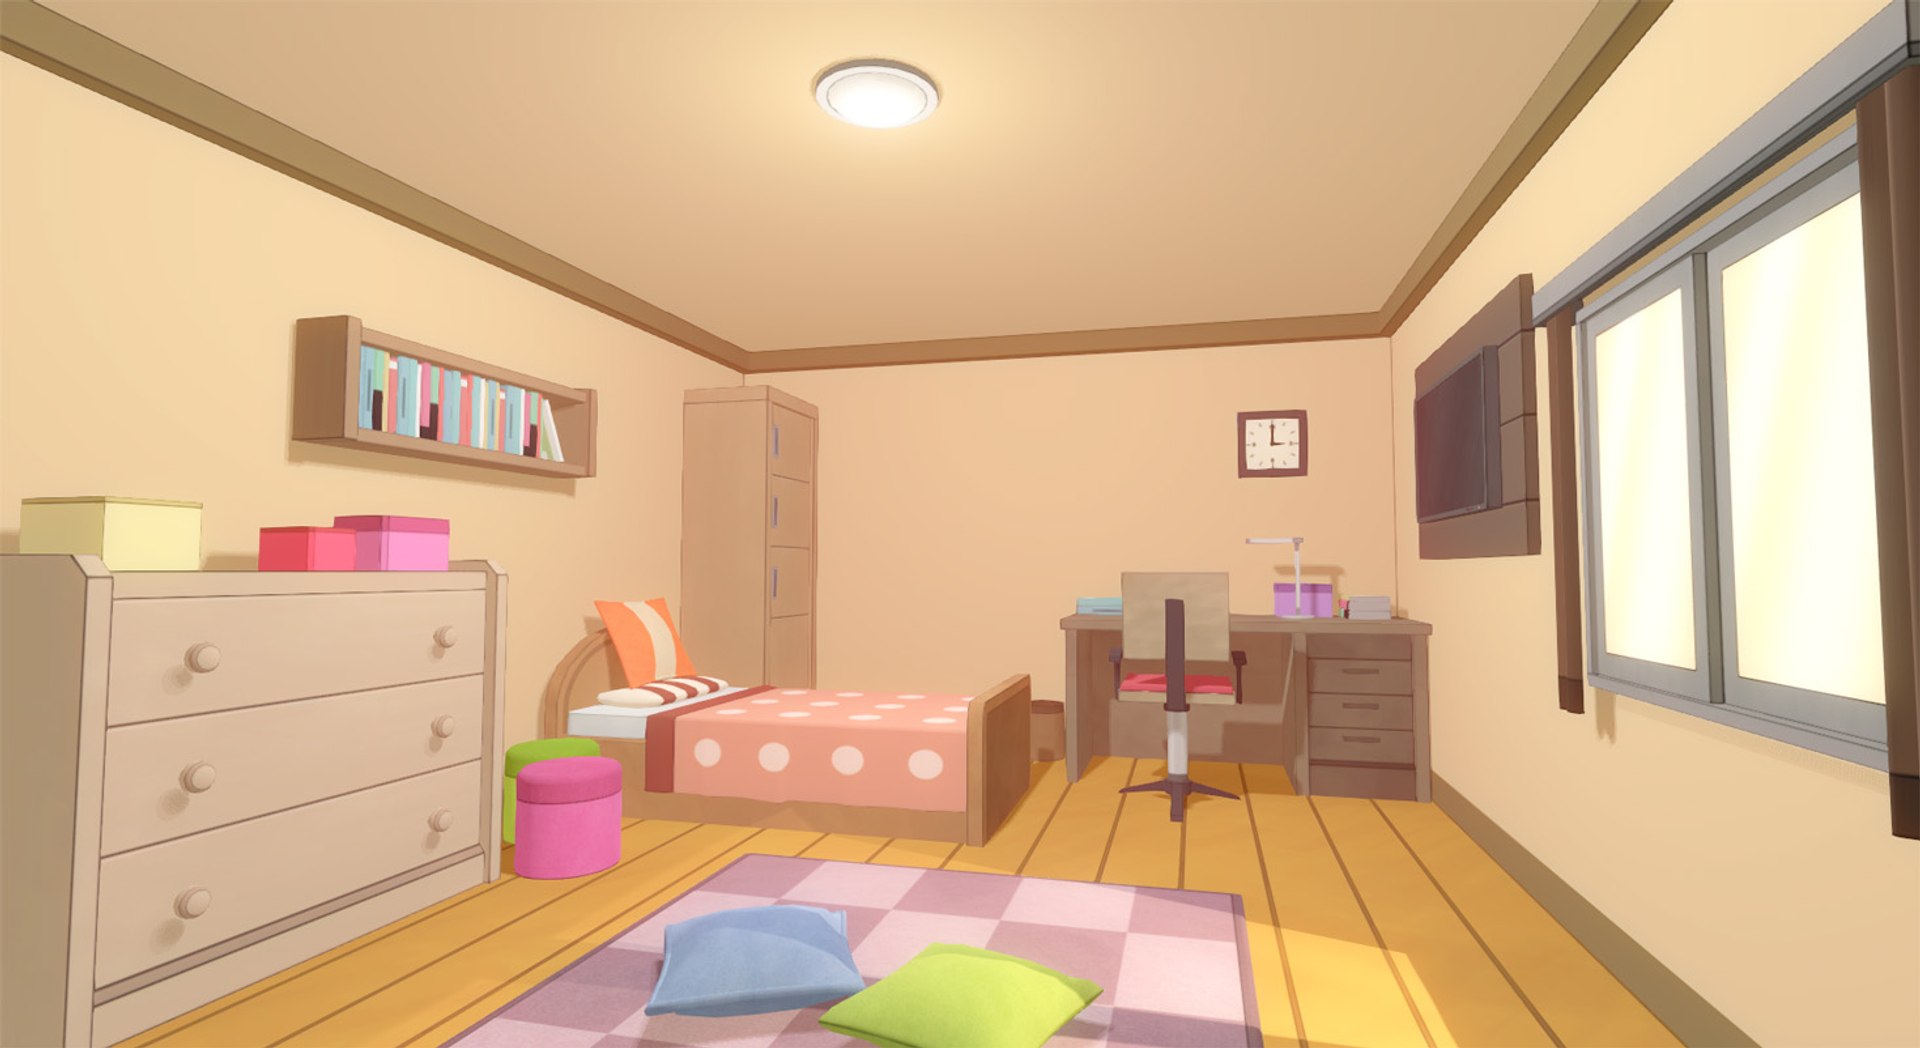 Visual Novel Background  A cosplayers room by SleepingSord on DeviantArt